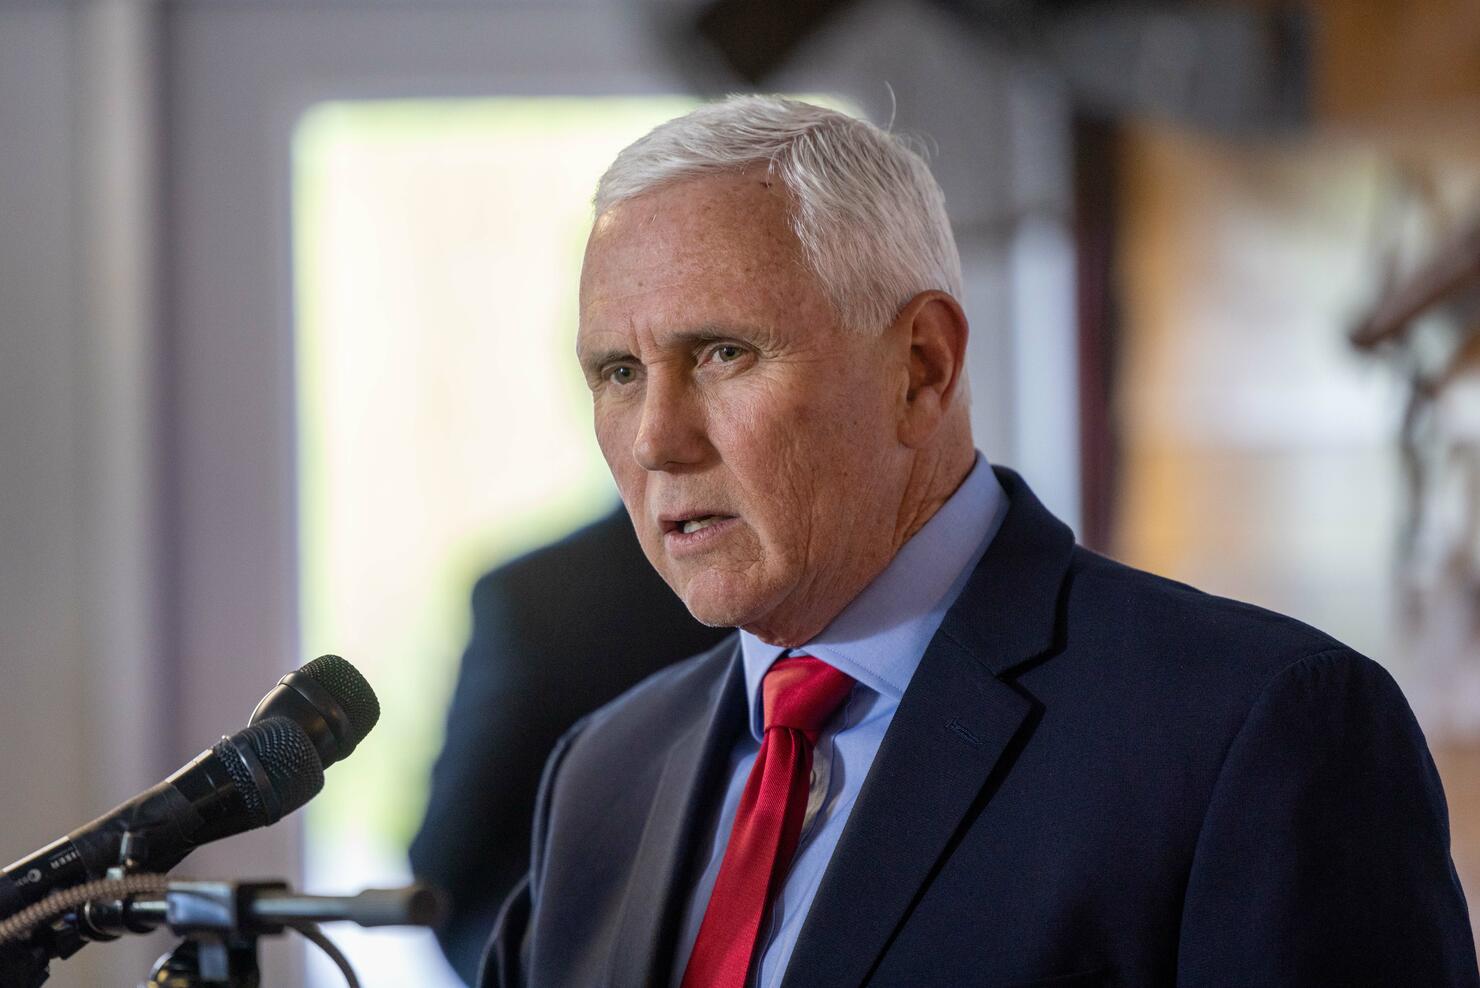 Mike Pence Attends New Hampshire "Lumber And Lobster" Event As Speculation About Presidential Run Builds